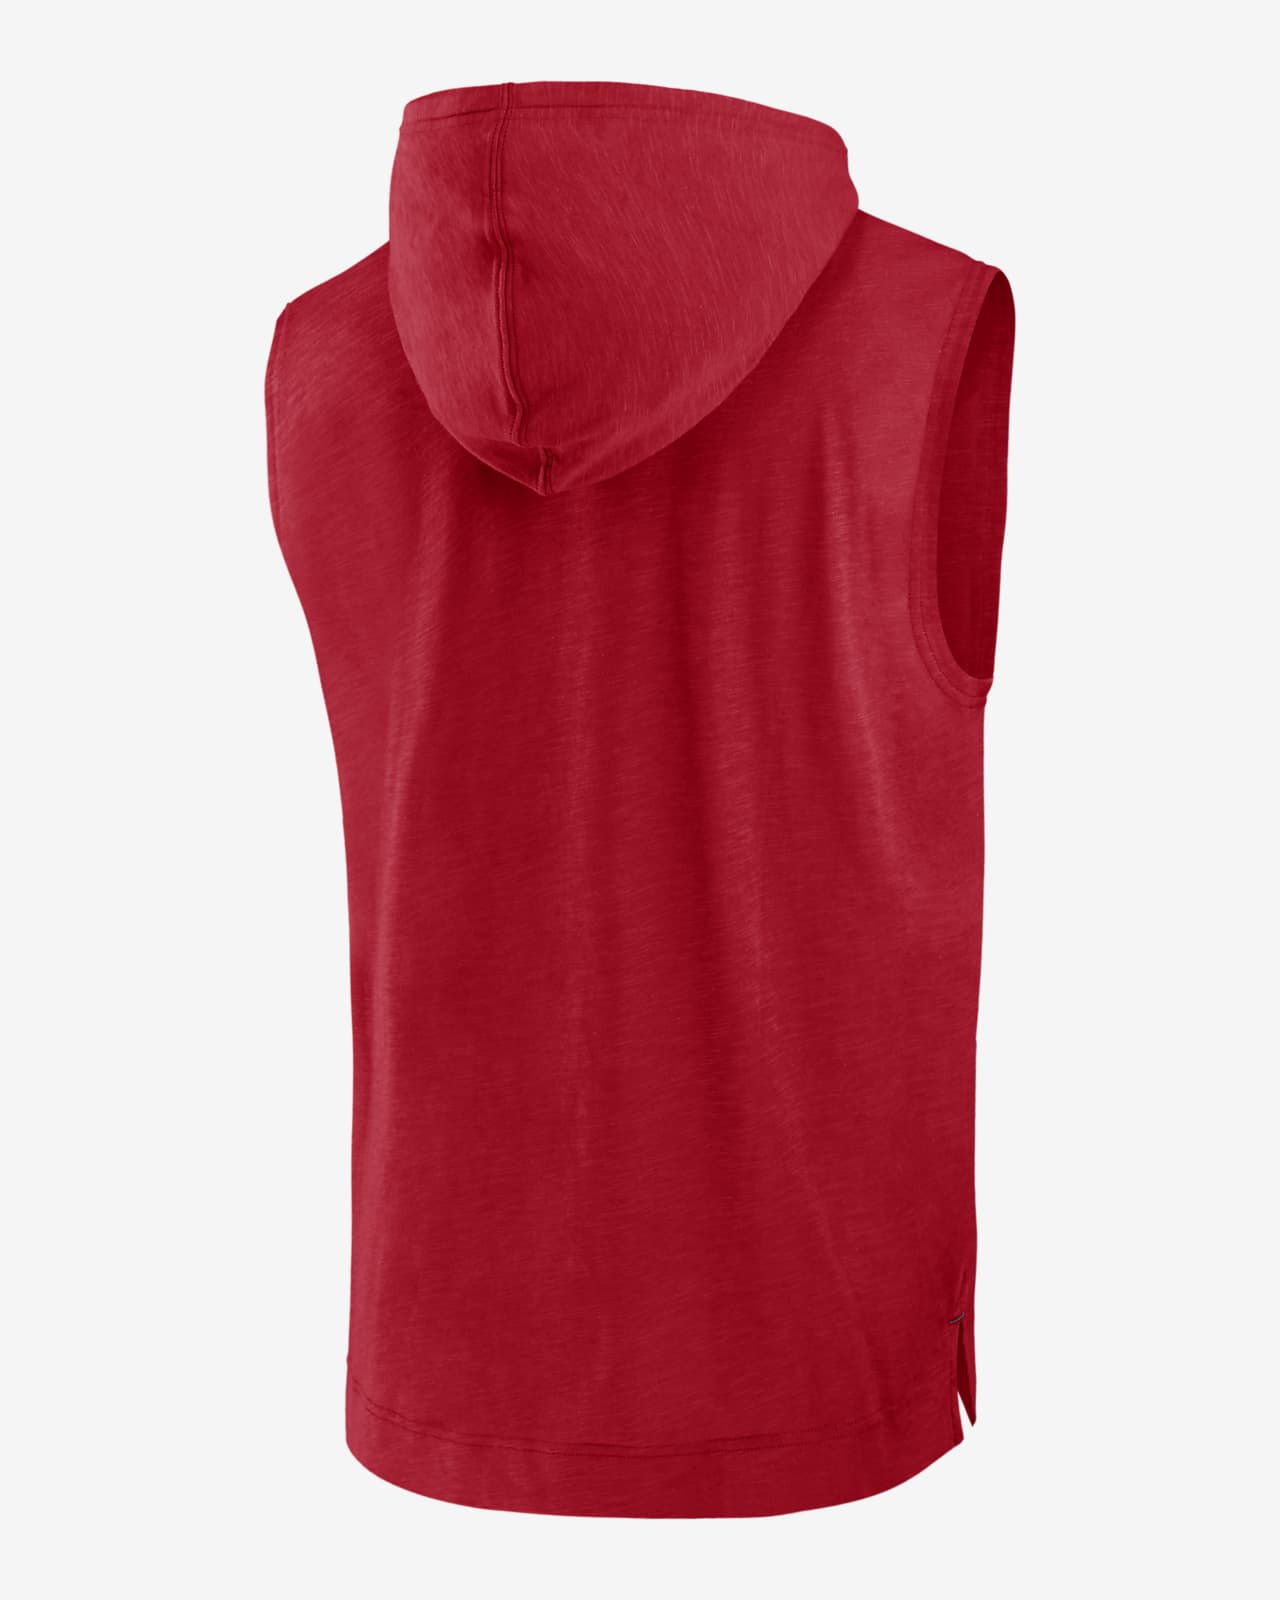 Nike Red St. Louis Cardinals Athletic Sleeveless Hooded T-shirt